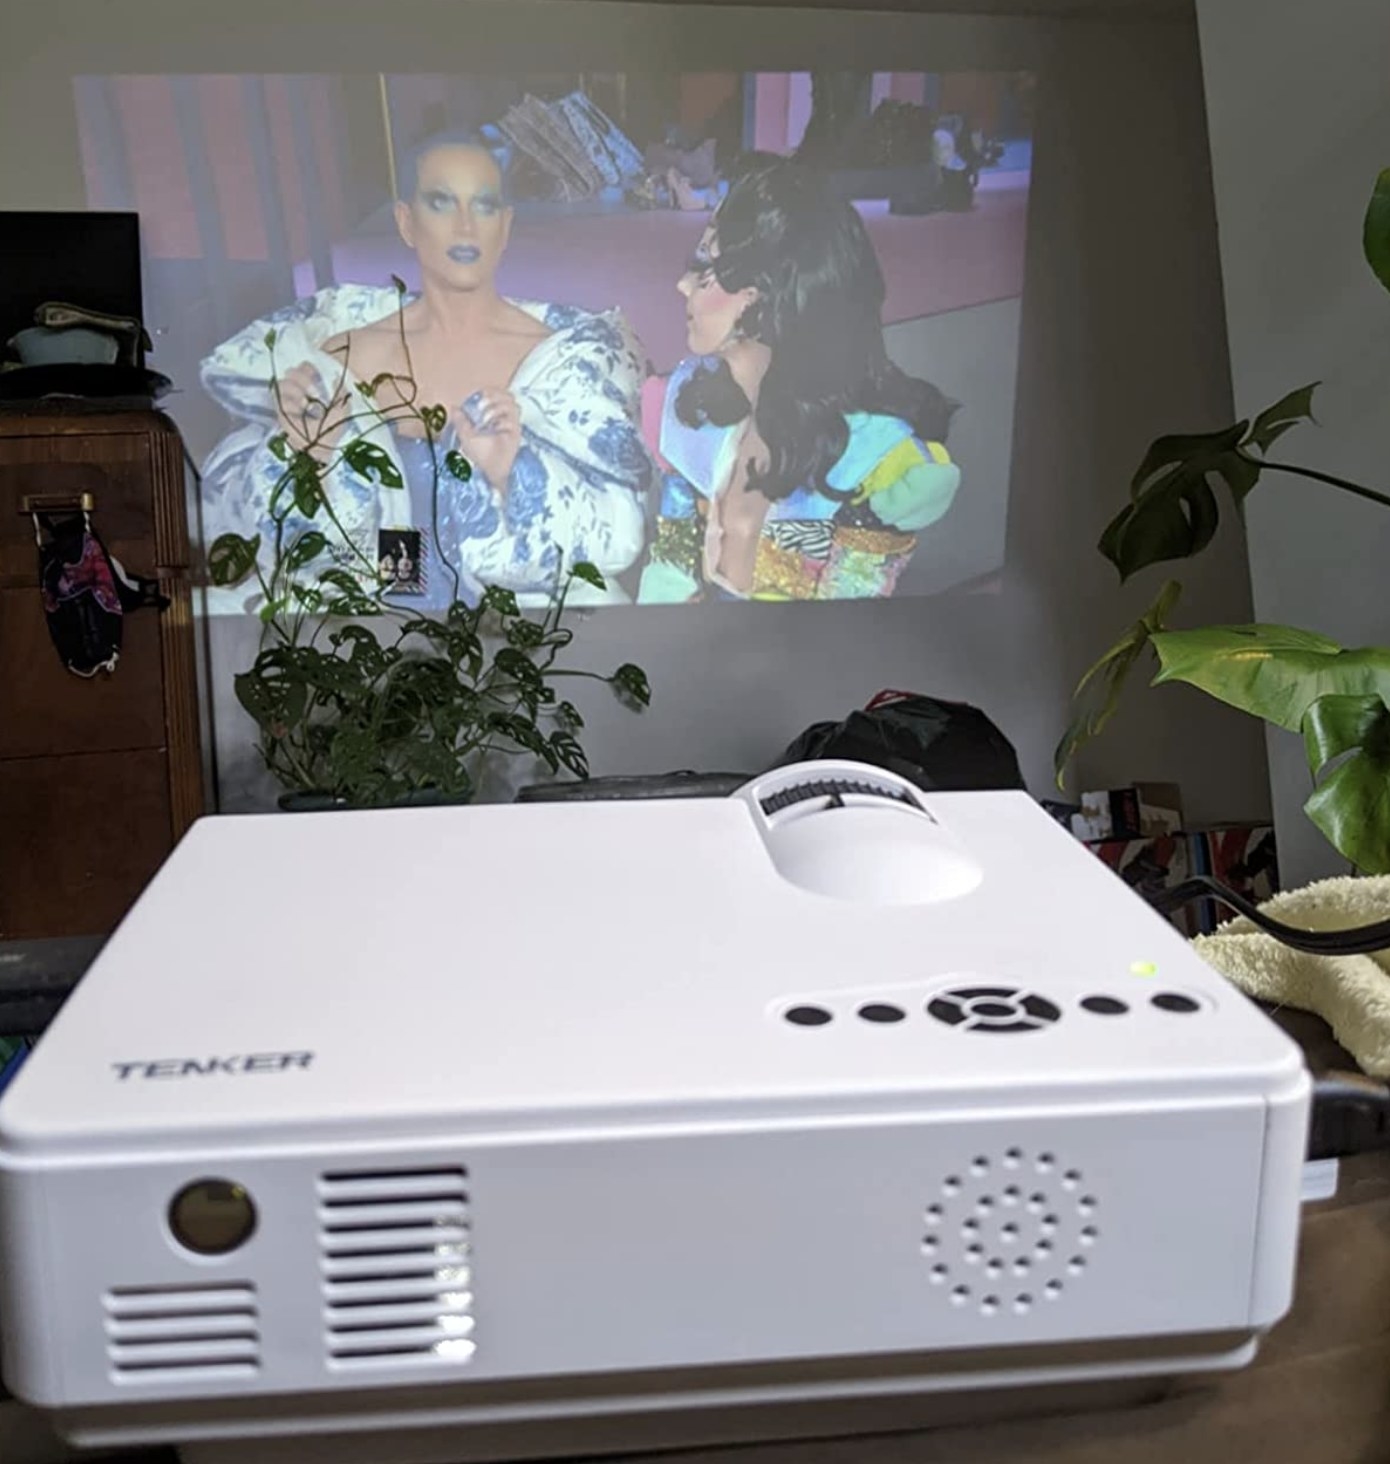 reviewer photo showing the projector in the foreground playing a show